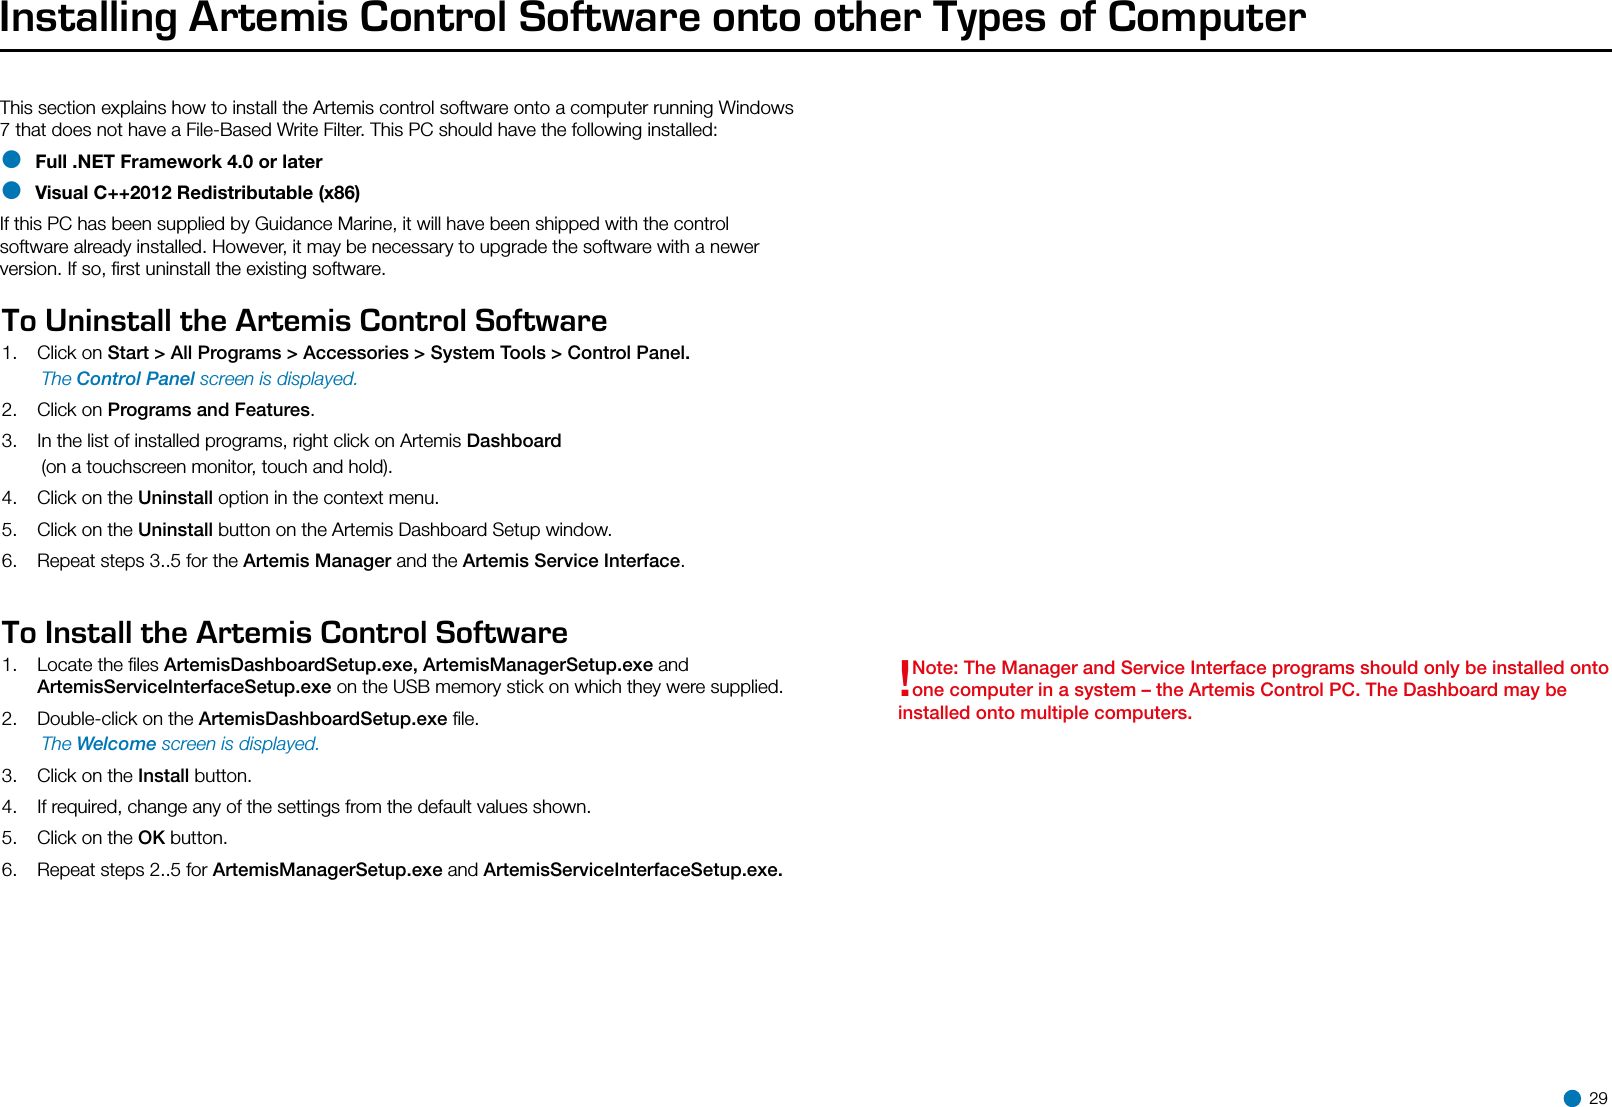 Installing Artemis Control Software onto other Types of ComputerThis section explains how to install the Artemis control software onto a computer running Windows 7 that does not have a File-Based Write Filter. This PC should have the following installed:• Full .NET Framework 4.0 or later• Visual C++2012 Redistributable (x86)If this PC has been supplied by Guidance Marine, it will have been shipped with the control software already installed. However, it may be necessary to upgrade the software with a newer version. If so, ﬁrst uninstall the existing software.Operating AreaTo Uninstall the Artemis Control Software1.  Click on Start &gt; All Programs &gt; Accessories &gt; System Tools &gt; Control Panel. The Control Panel screen is displayed.2.  Click on Programs and Features.3.  In the list of installed programs, right click on Artemis Dashboard   (on a touchscreen monitor, touch and hold).4.  Click on the Uninstall option in the context menu.5.  Click on the Uninstall button on the Artemis Dashboard Setup window.6.  Repeat steps 3..5 for the Artemis Manager and the Artemis Service Interface.To Install the Artemis Control Software1.  Locate the ﬁles ArtemisDashboardSetup.exe, ArtemisManagerSetup.exe and ArtemisServiceInterfaceSetup.exe on the USB memory stick on which they were supplied.2.   Double-click on the ArtemisDashboardSetup.exe ﬁle. The Welcome screen is displayed.3.  Click on the Install button.4.  If required, change any of the settings from the default values shown.5.  Click on the OK button.6.  Repeat steps 2..5 for ArtemisManagerSetup.exe and ArtemisServiceInterfaceSetup.exe.!Note: The Manager and Service Interface programs should only be installed onto one computer in a system – the Artemis Control PC. The Dashboard may be installed onto multiple computers. 29